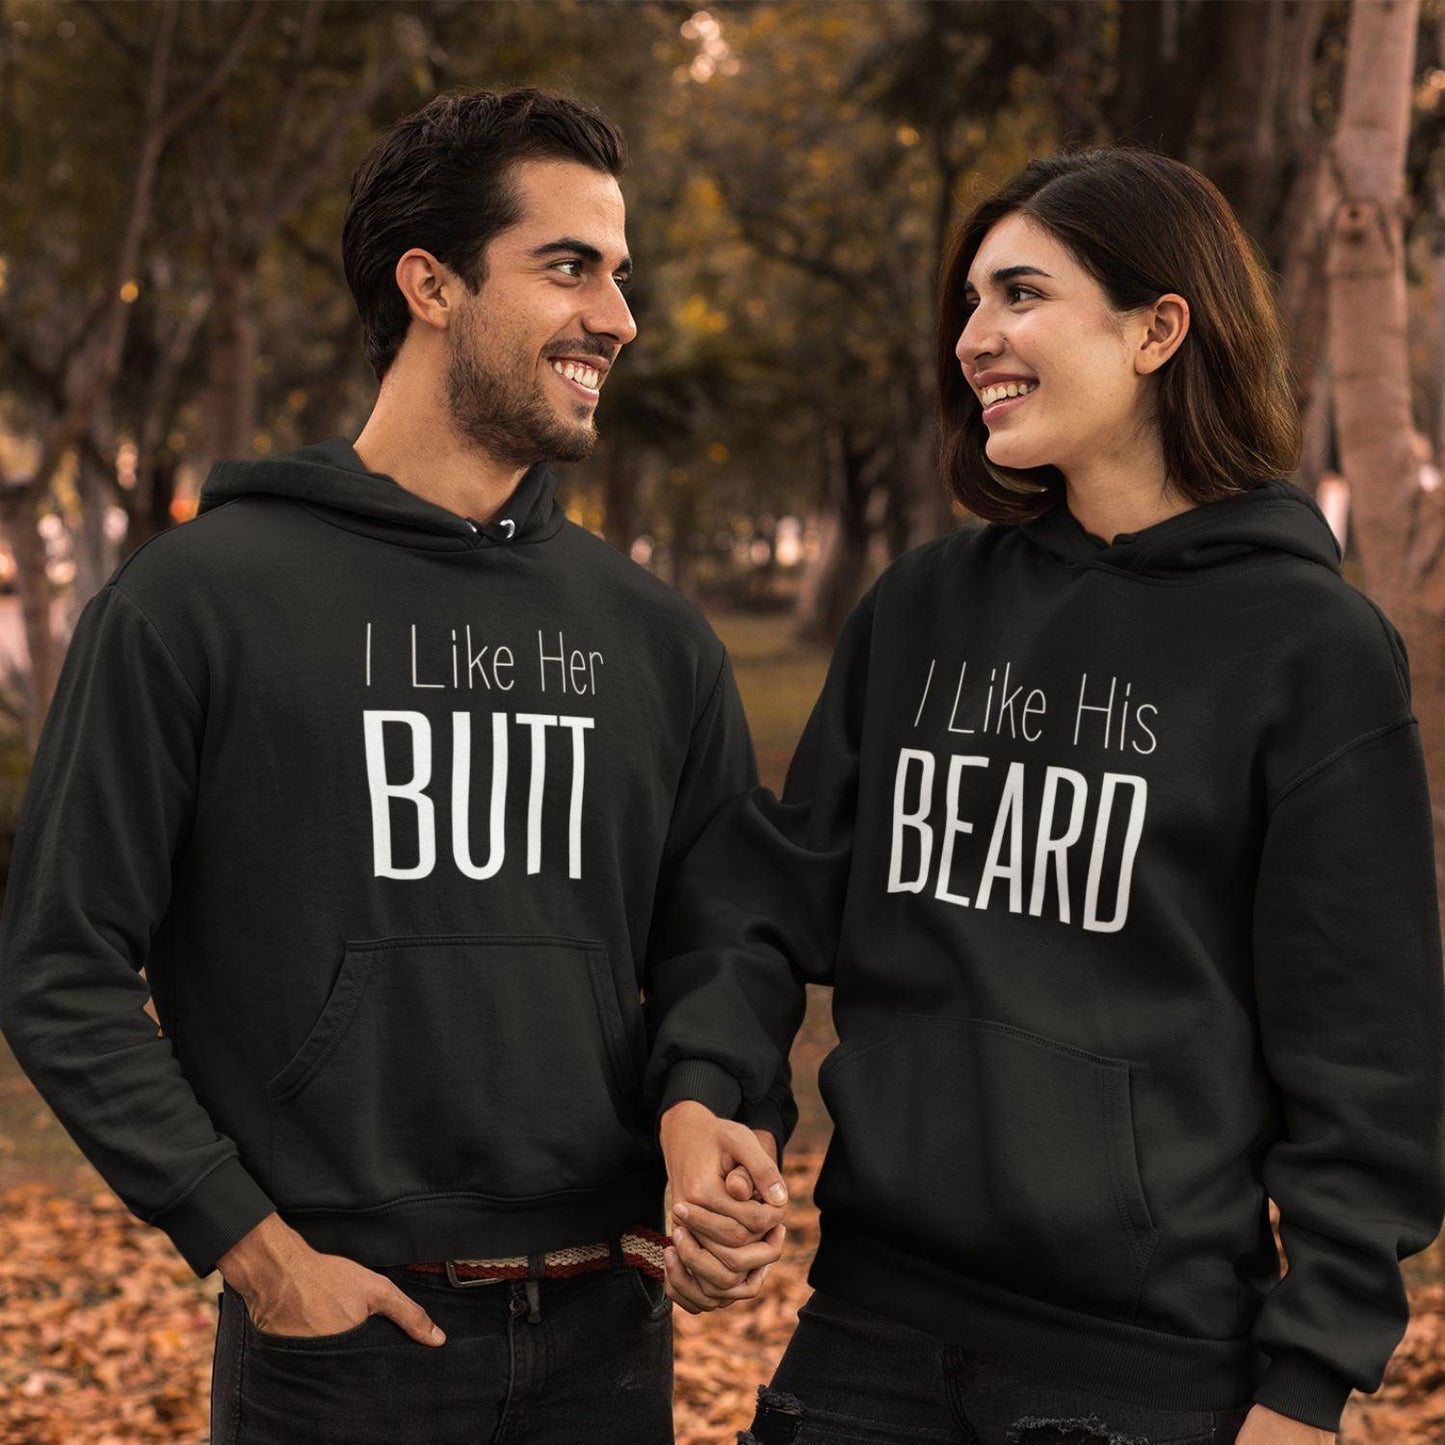 Matching Set: I Like Her Butt & His Beard - Funny Couple Outfit & Gift for Couples - 4Lovebirds